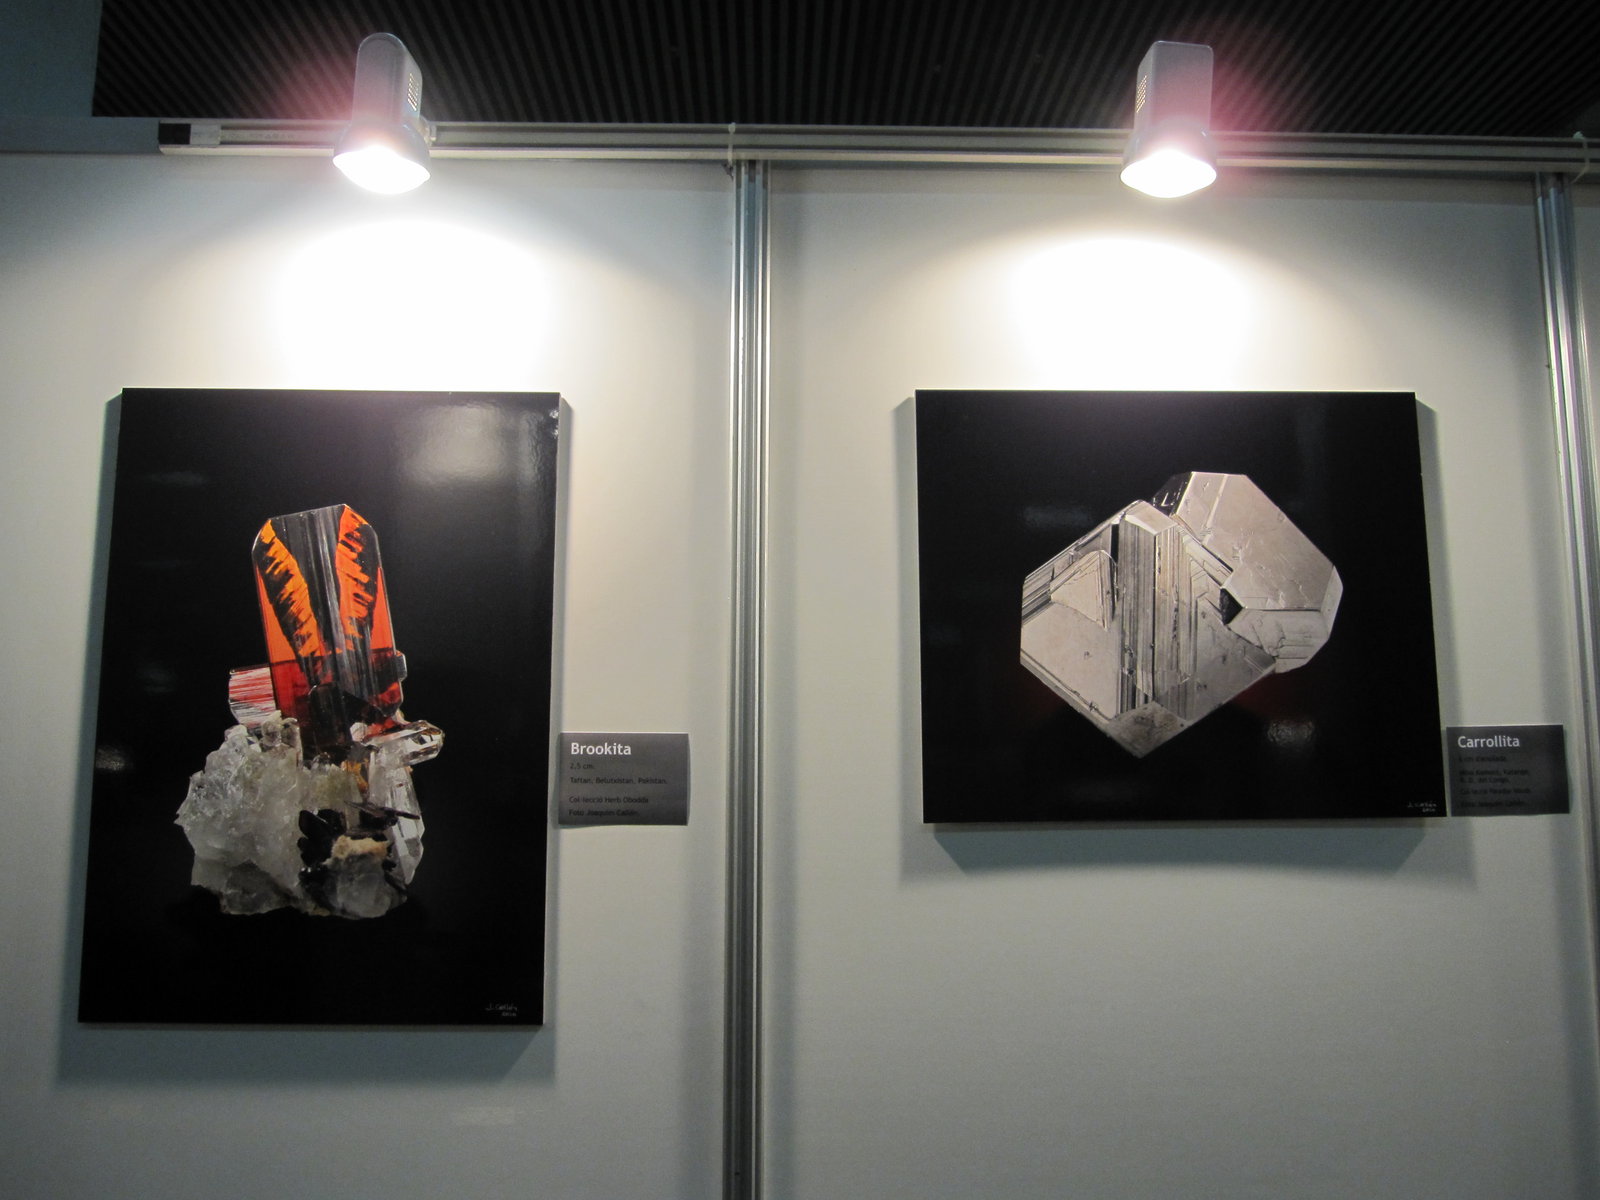 /include/Virtuals/AM2-E2020/AM2images/ASI/Expominer2010-Exposicion.jpg